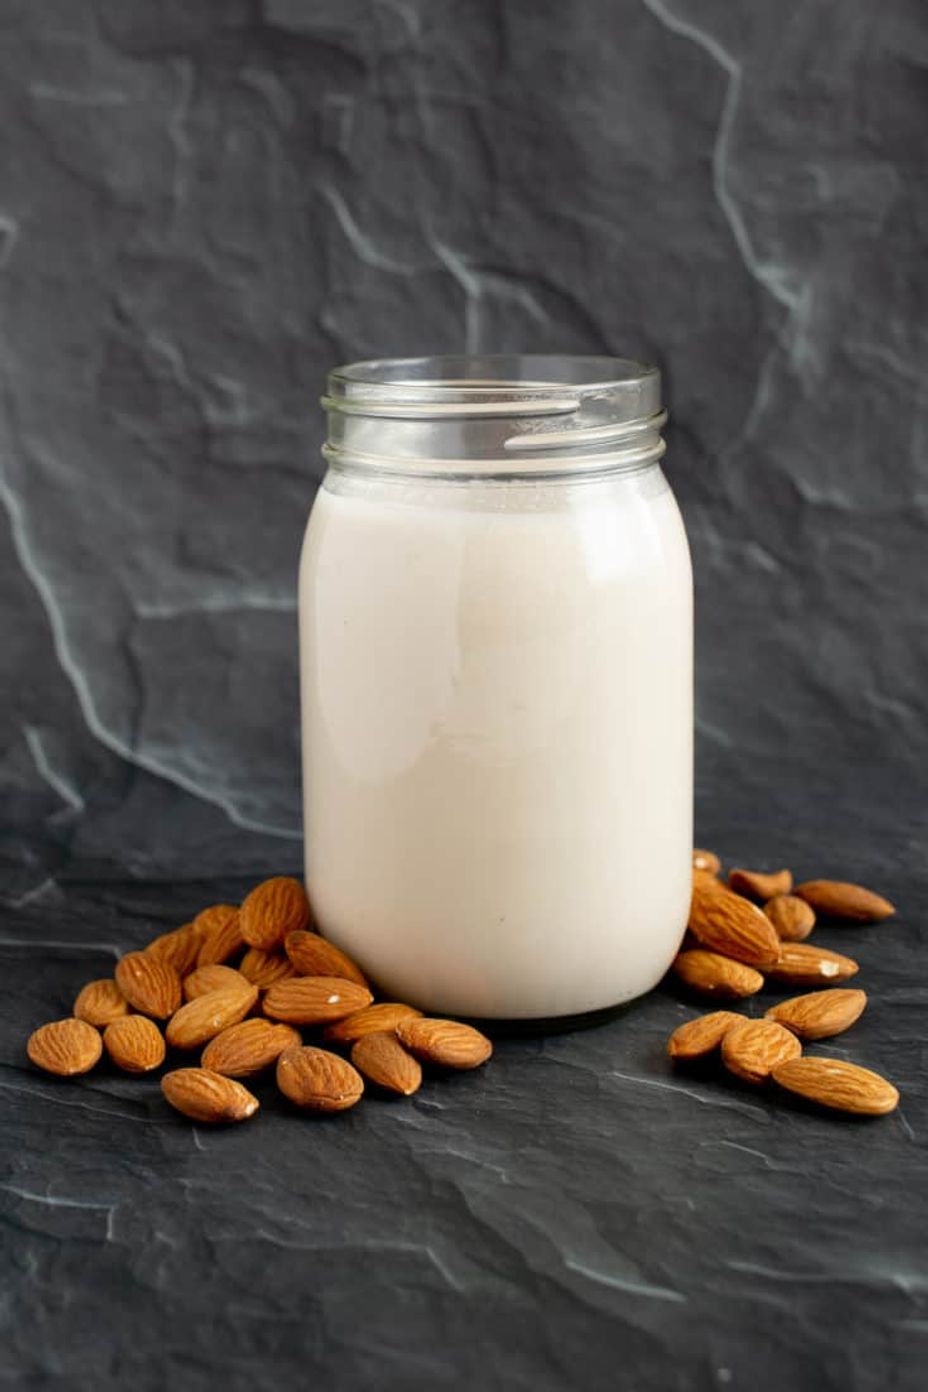 <p>Almond Milk <a class="tm-topic-link ugc-topic" title="suicidal ideation" href="/topic/suicidal-ideation/" data-id="5b23cebd00553f33fe99d707" data-name="suicidal ideation" aria-label="hashtag suicidal ideation">#SuicidalIdeation</a> </p>